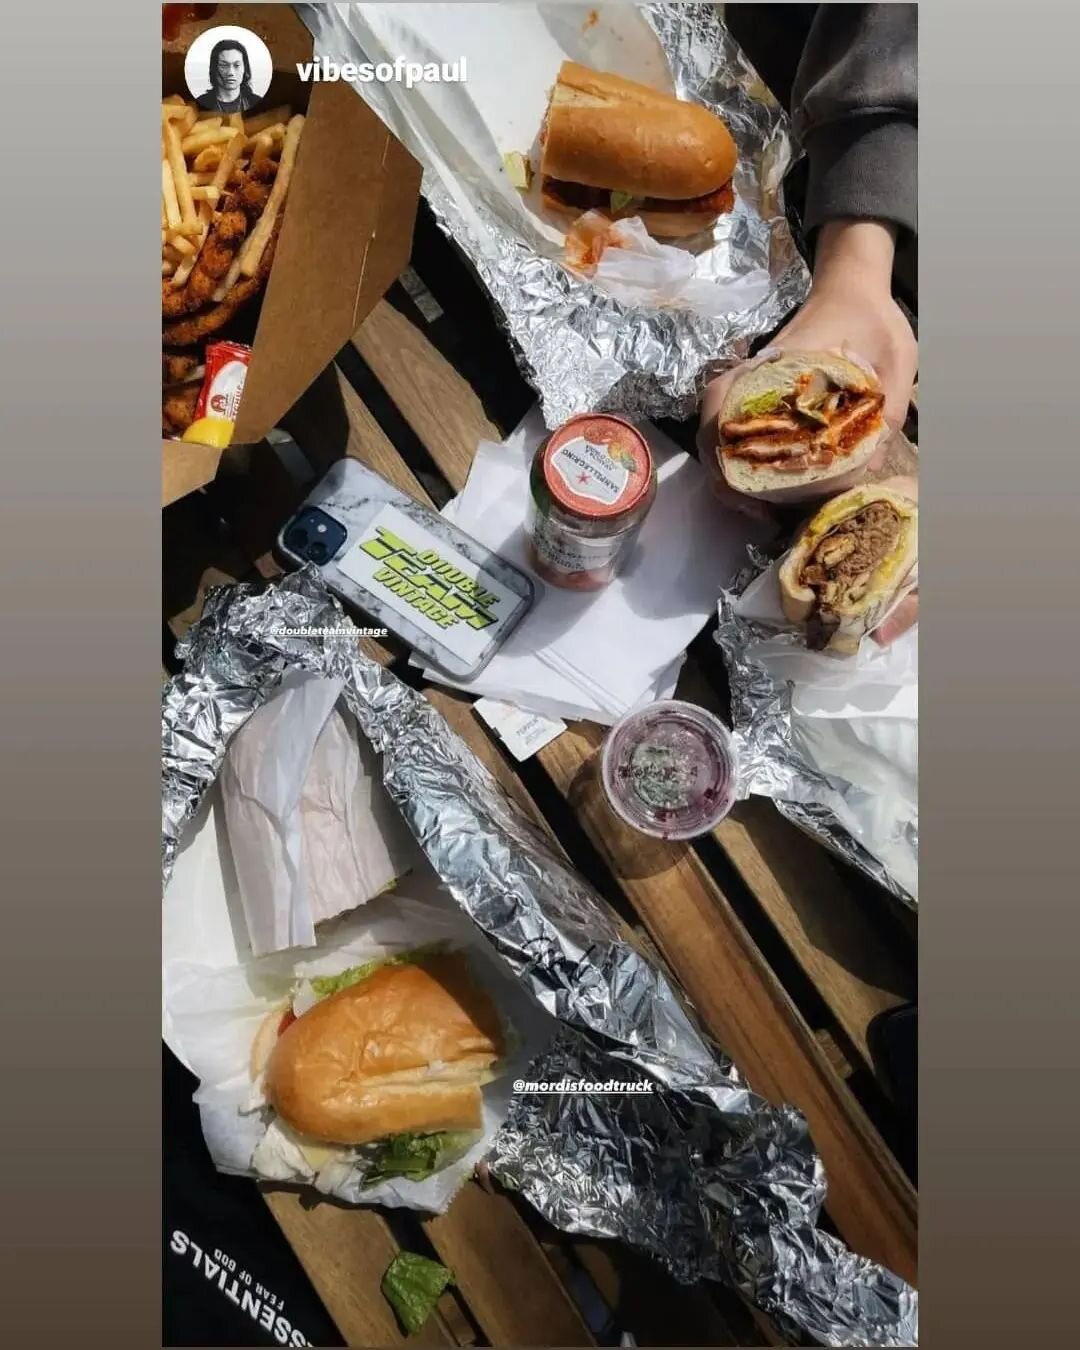 Happy Monday! We are OPEN 10am-8pm and available for pickup or delivery via @ubereats @postmates 

Thanks @vibesofpaul for the great photo!

#MordisSandwichShop #jerseycity #Monday #mondaymotivation #sandwichshop #sandwiches #salads #burgers #fries #